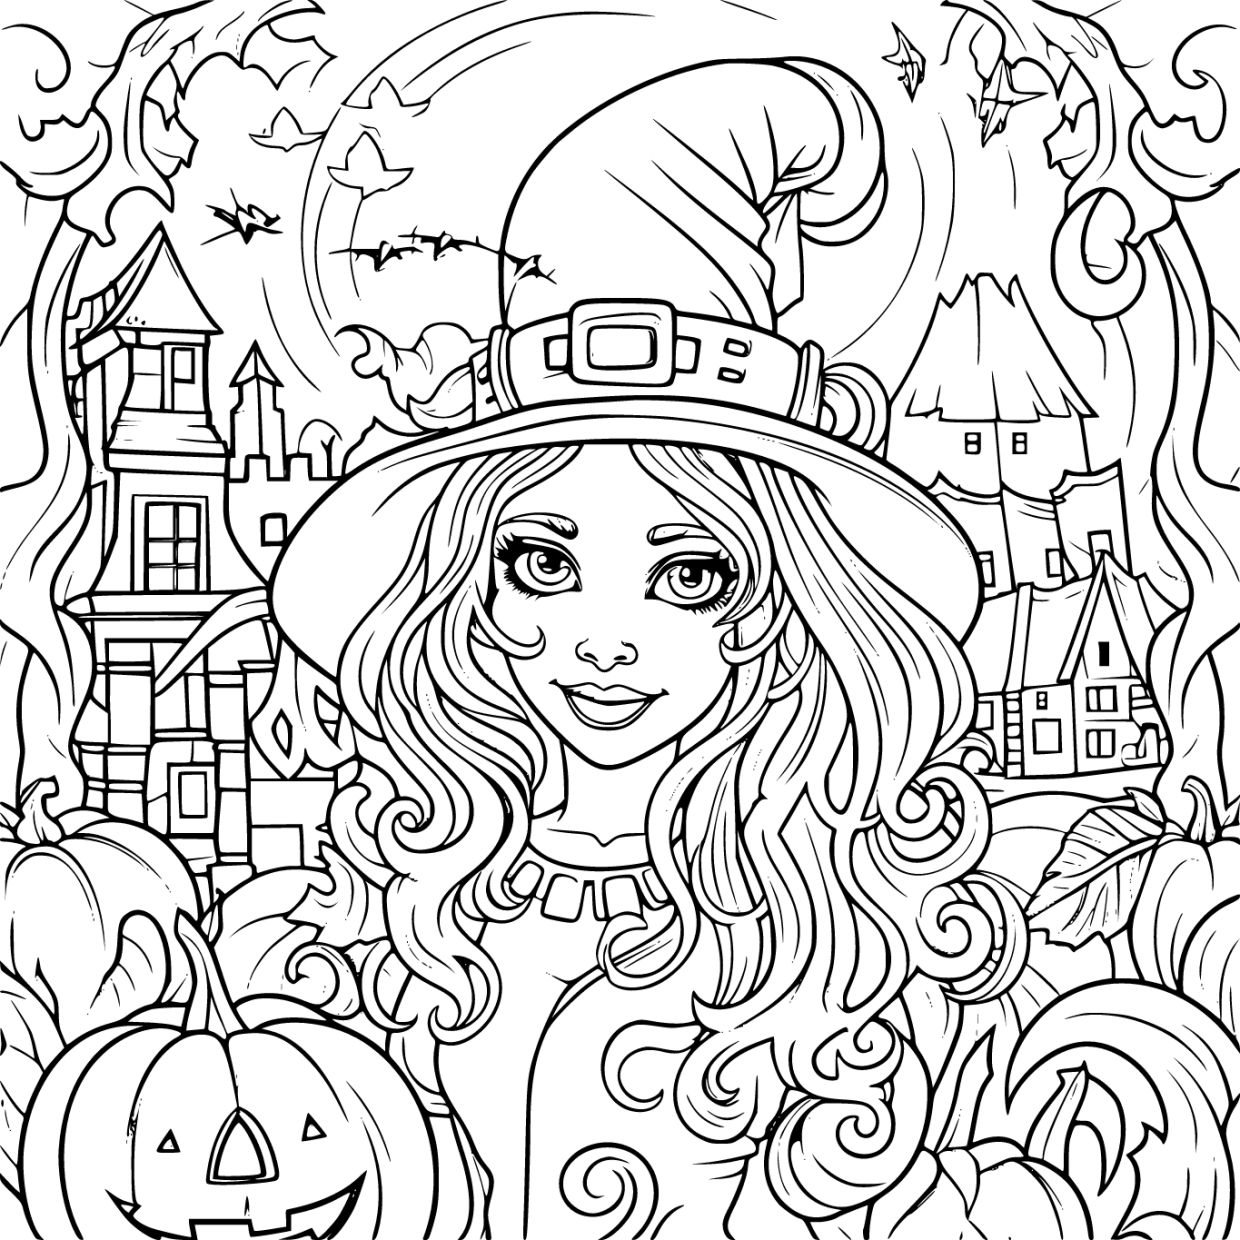 Halloween coloring pages to print for kids - GBcoloring